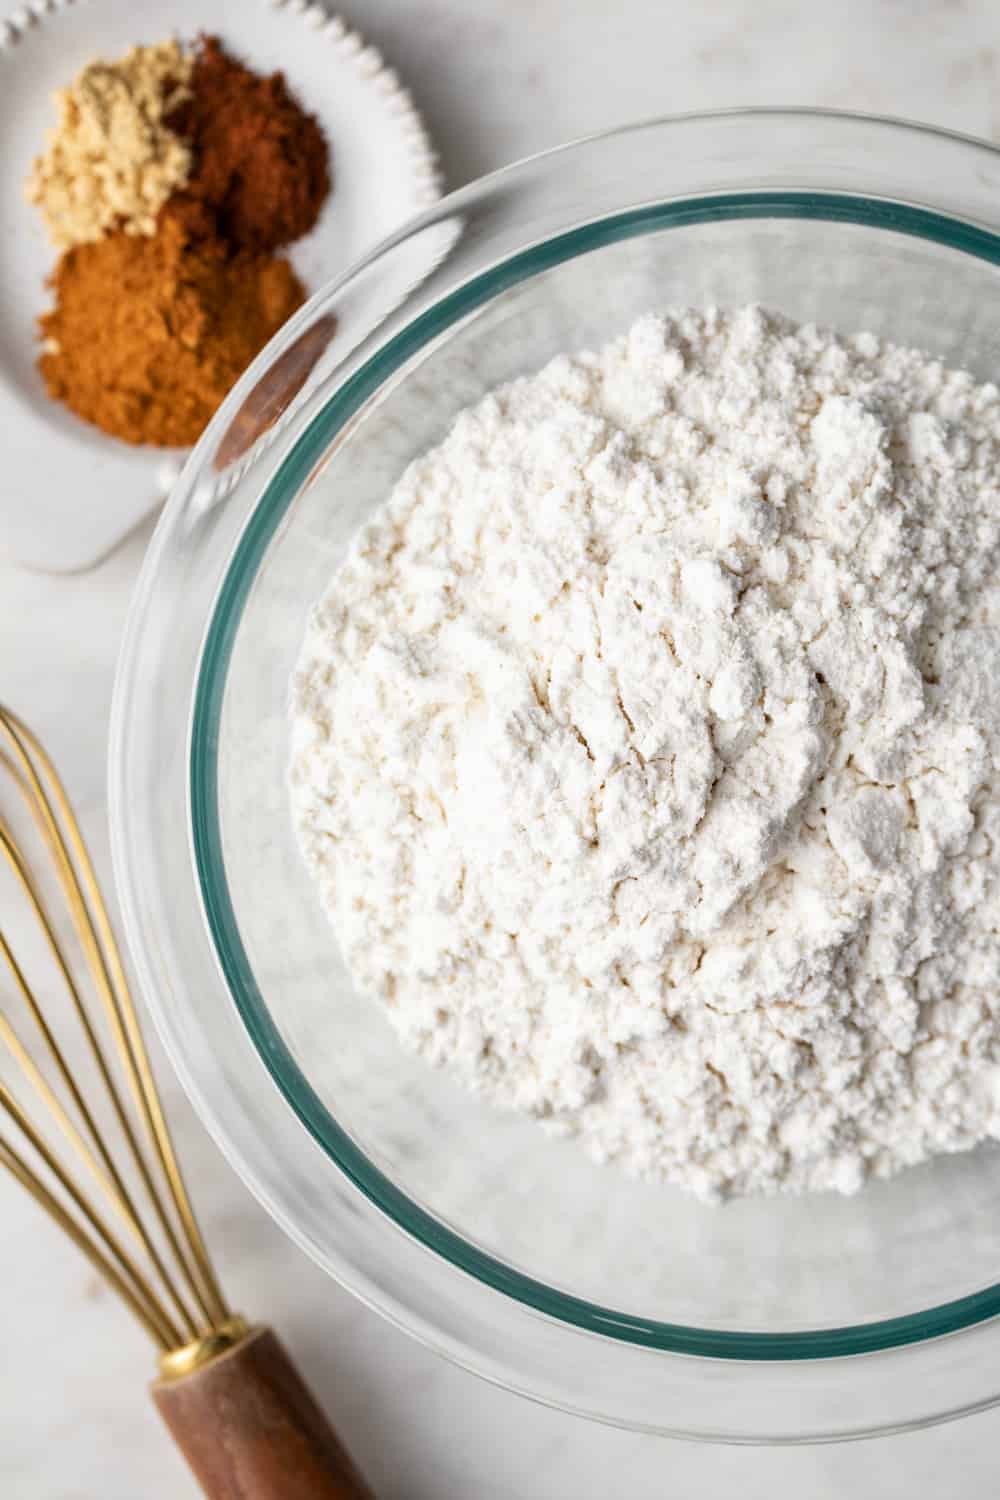 Dry ingredients for gingerbread cake in a glass mixing bowl